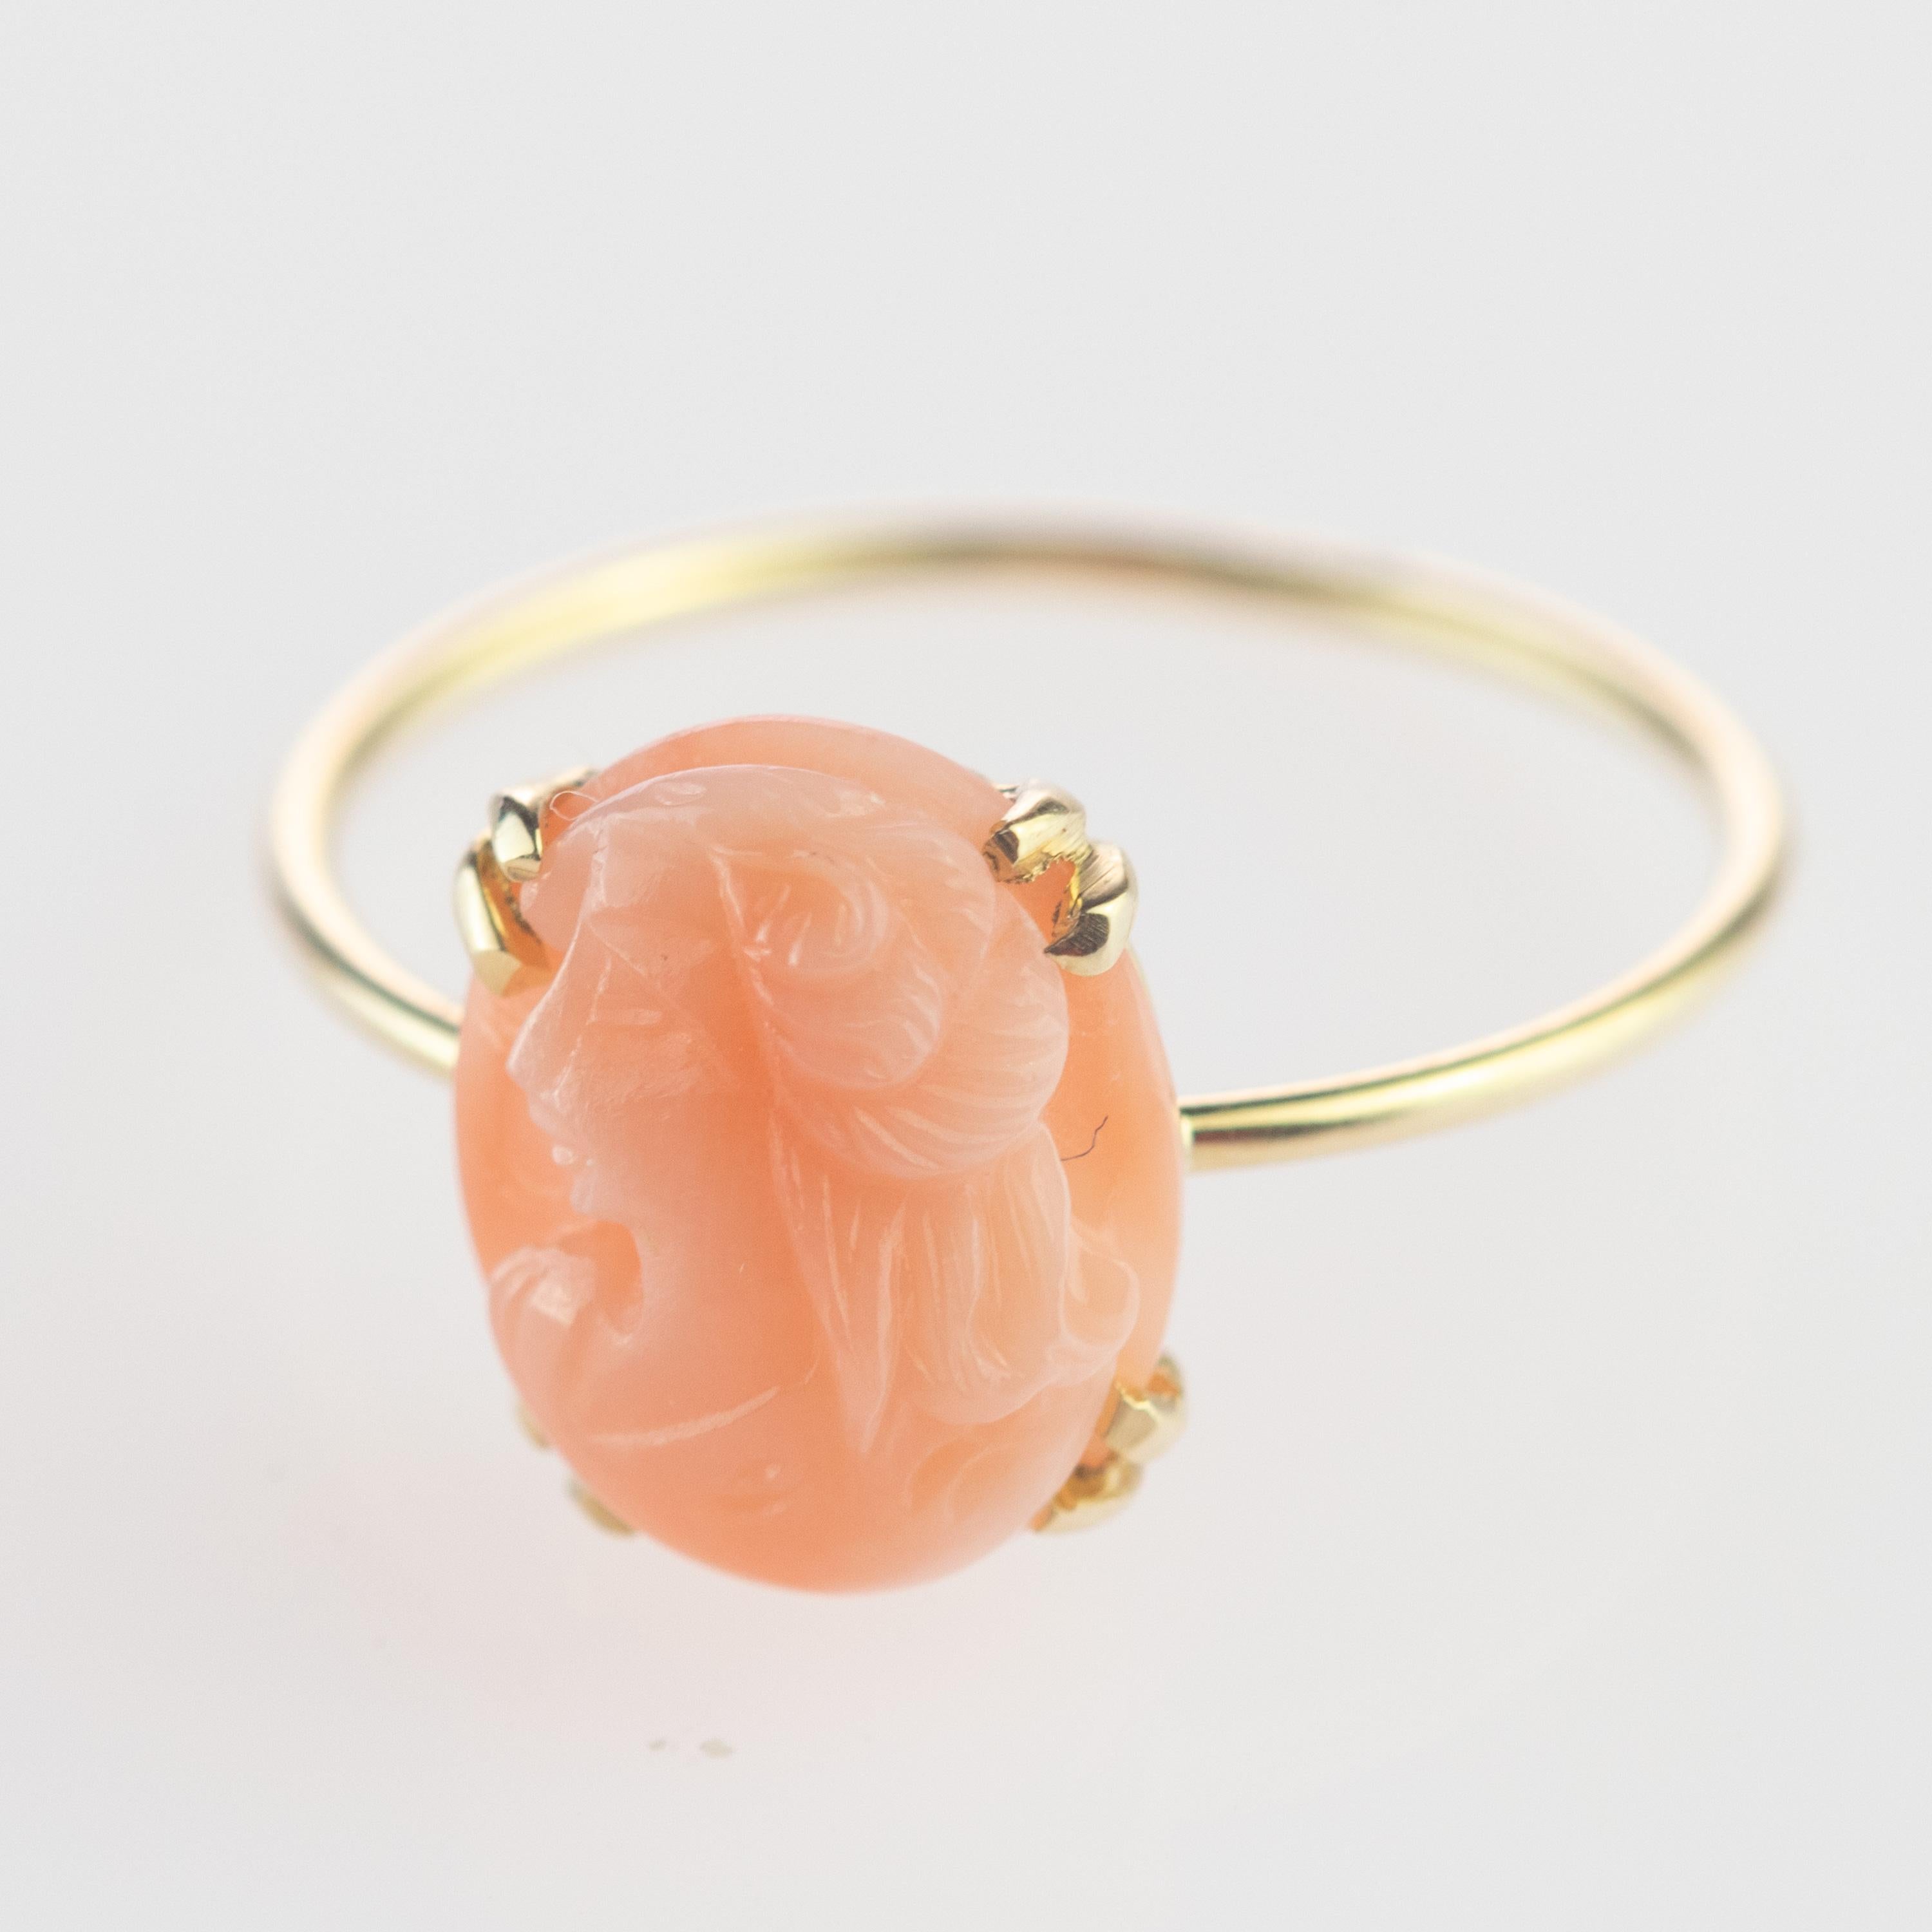 Intini Jewels 2.5 Carat Pink Cameo Coral 9 Karat Gold Oval Handmade Chic Ring For Sale 1